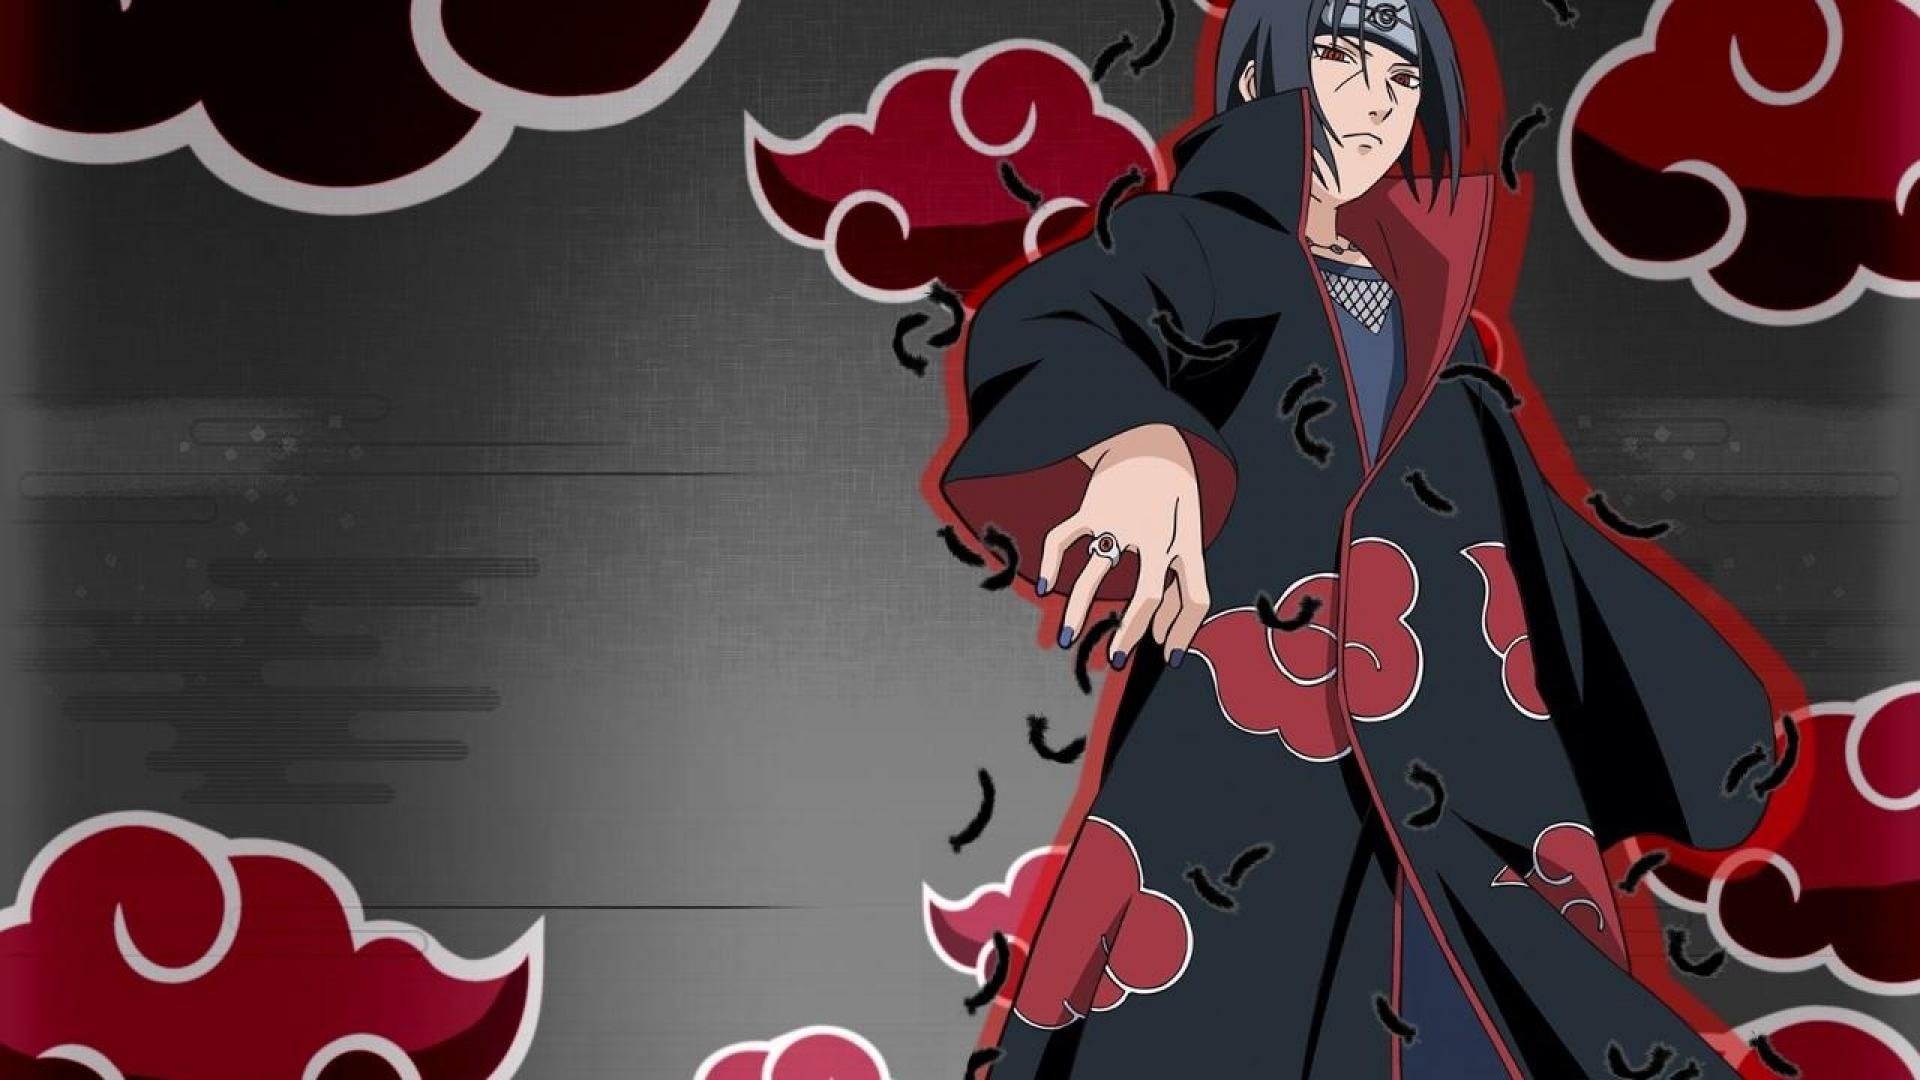 Itachi Uchiha wallpaper ·① Download free awesome backgrounds for